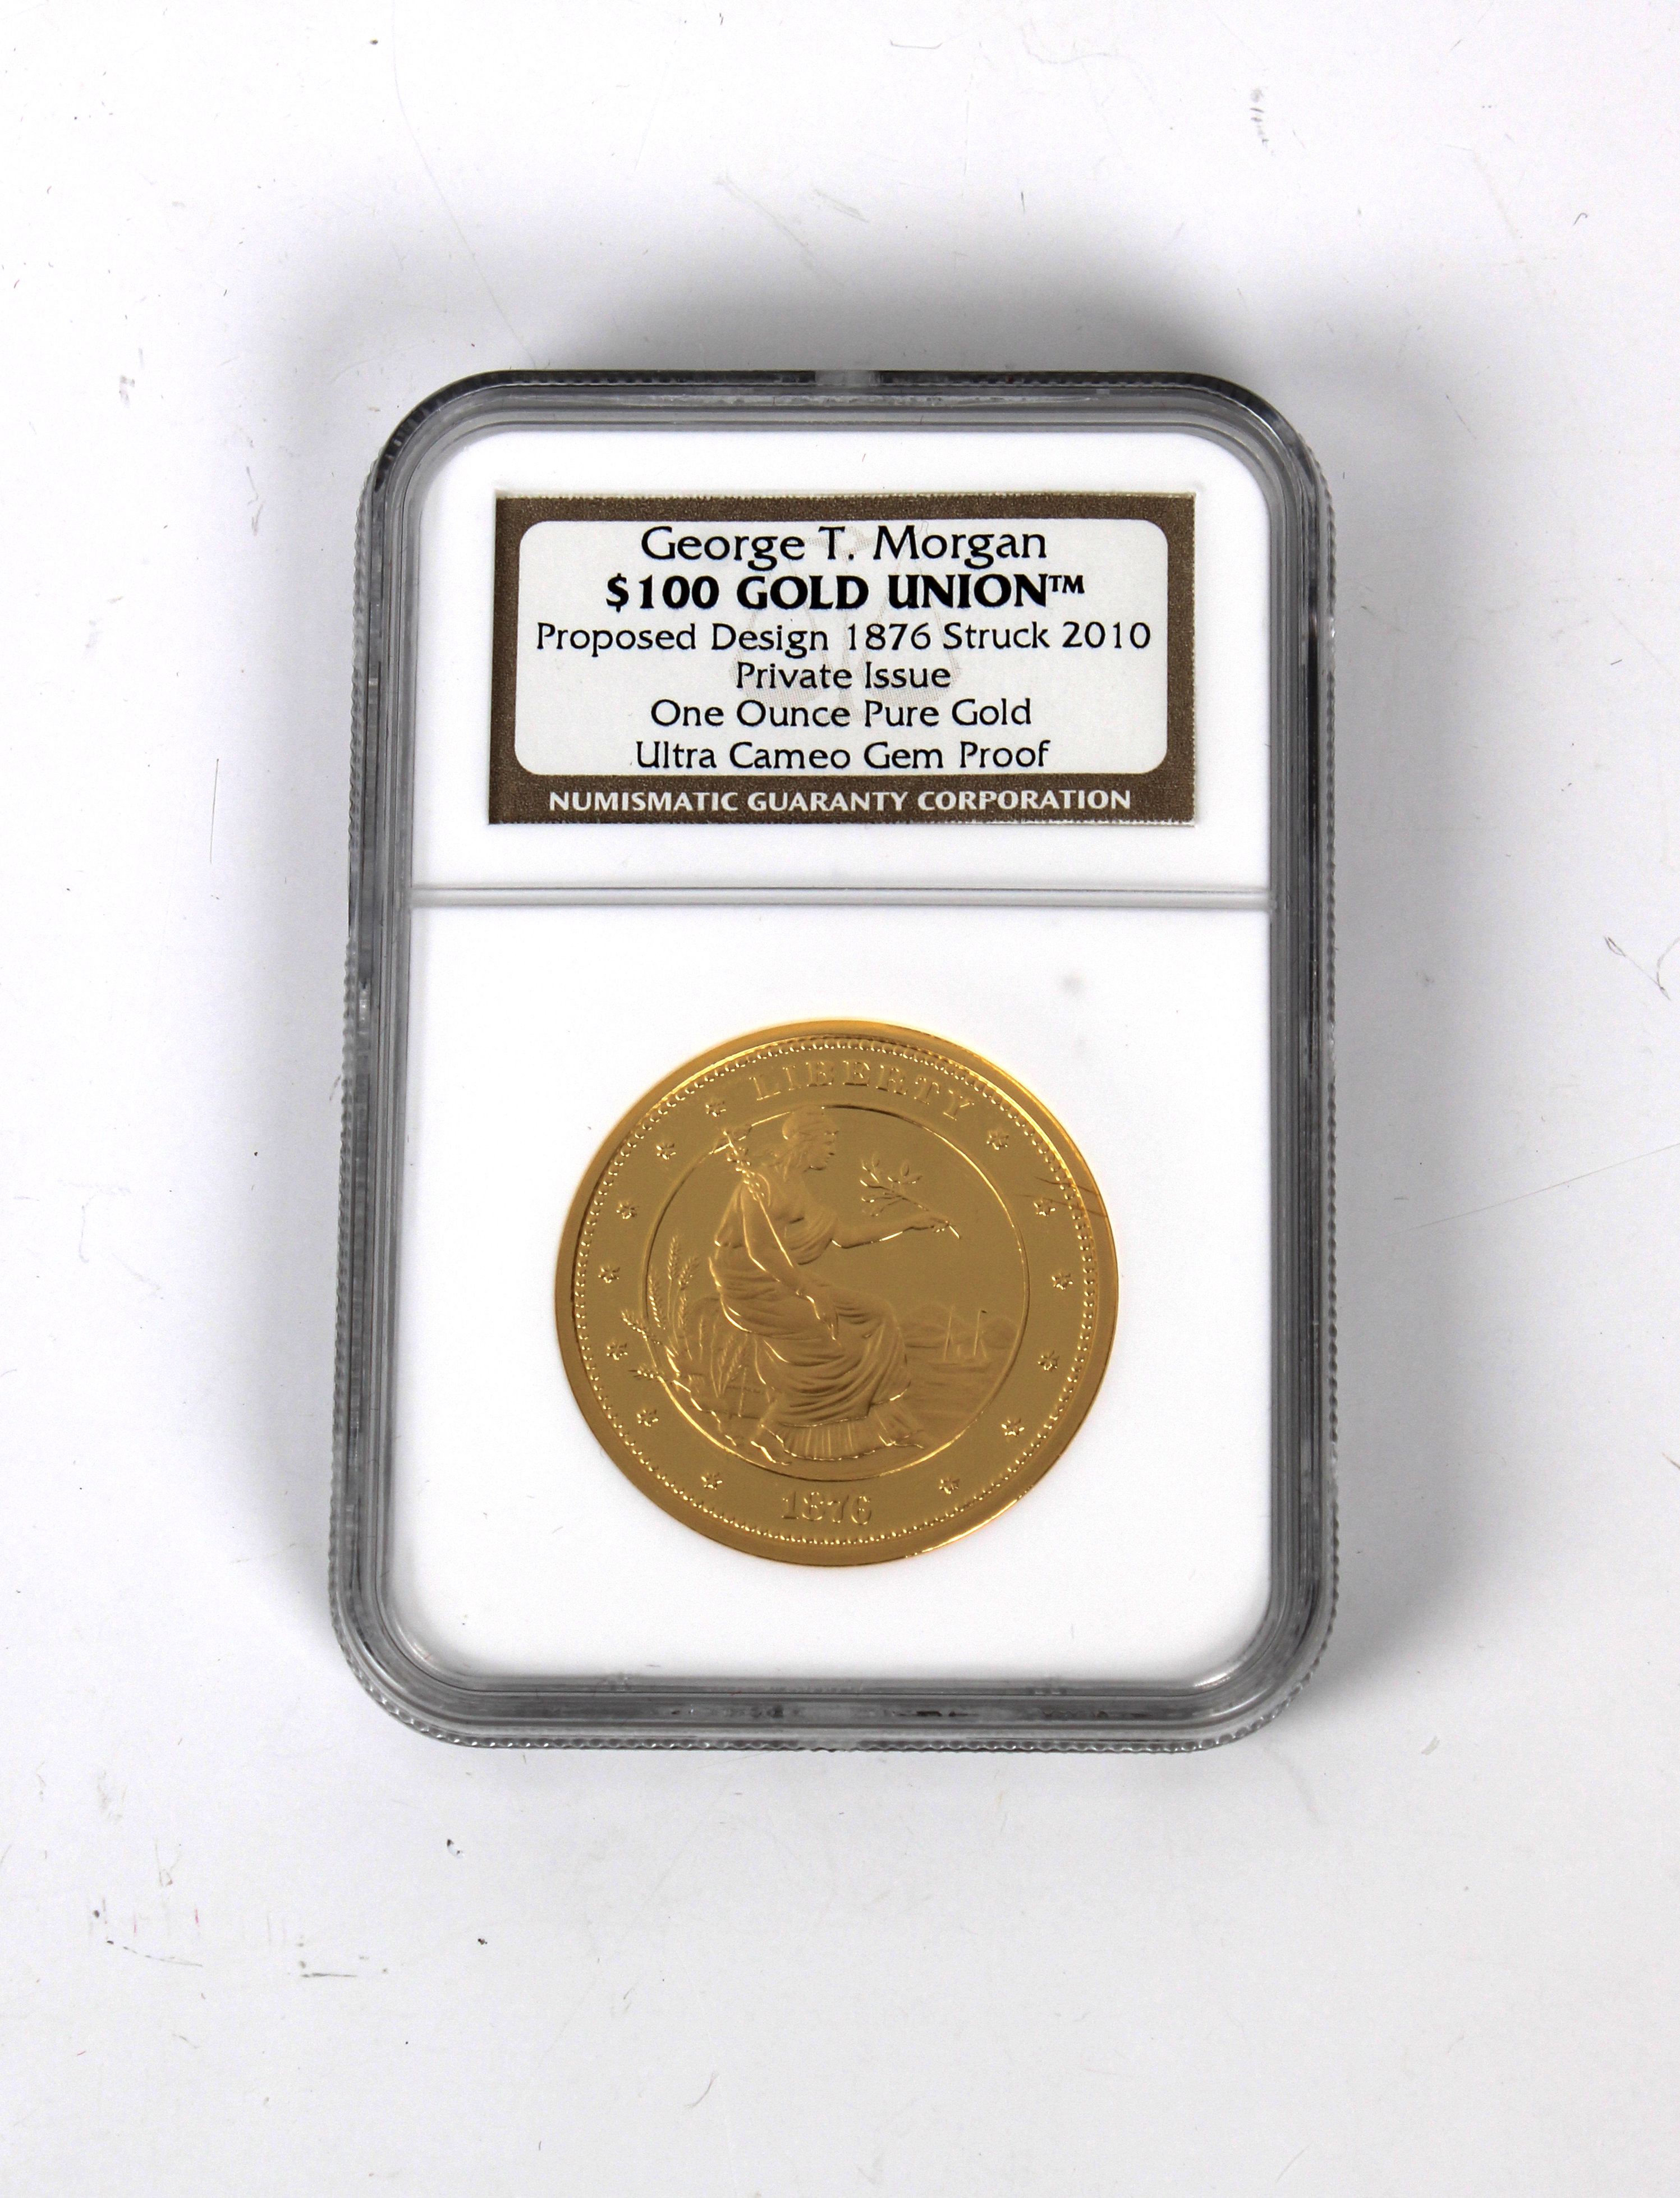 A very rare George T. Morgan $100 Gold Union 2010 Ultra Cameo Gem Proof coin - NGC capsulated - Image 2 of 3